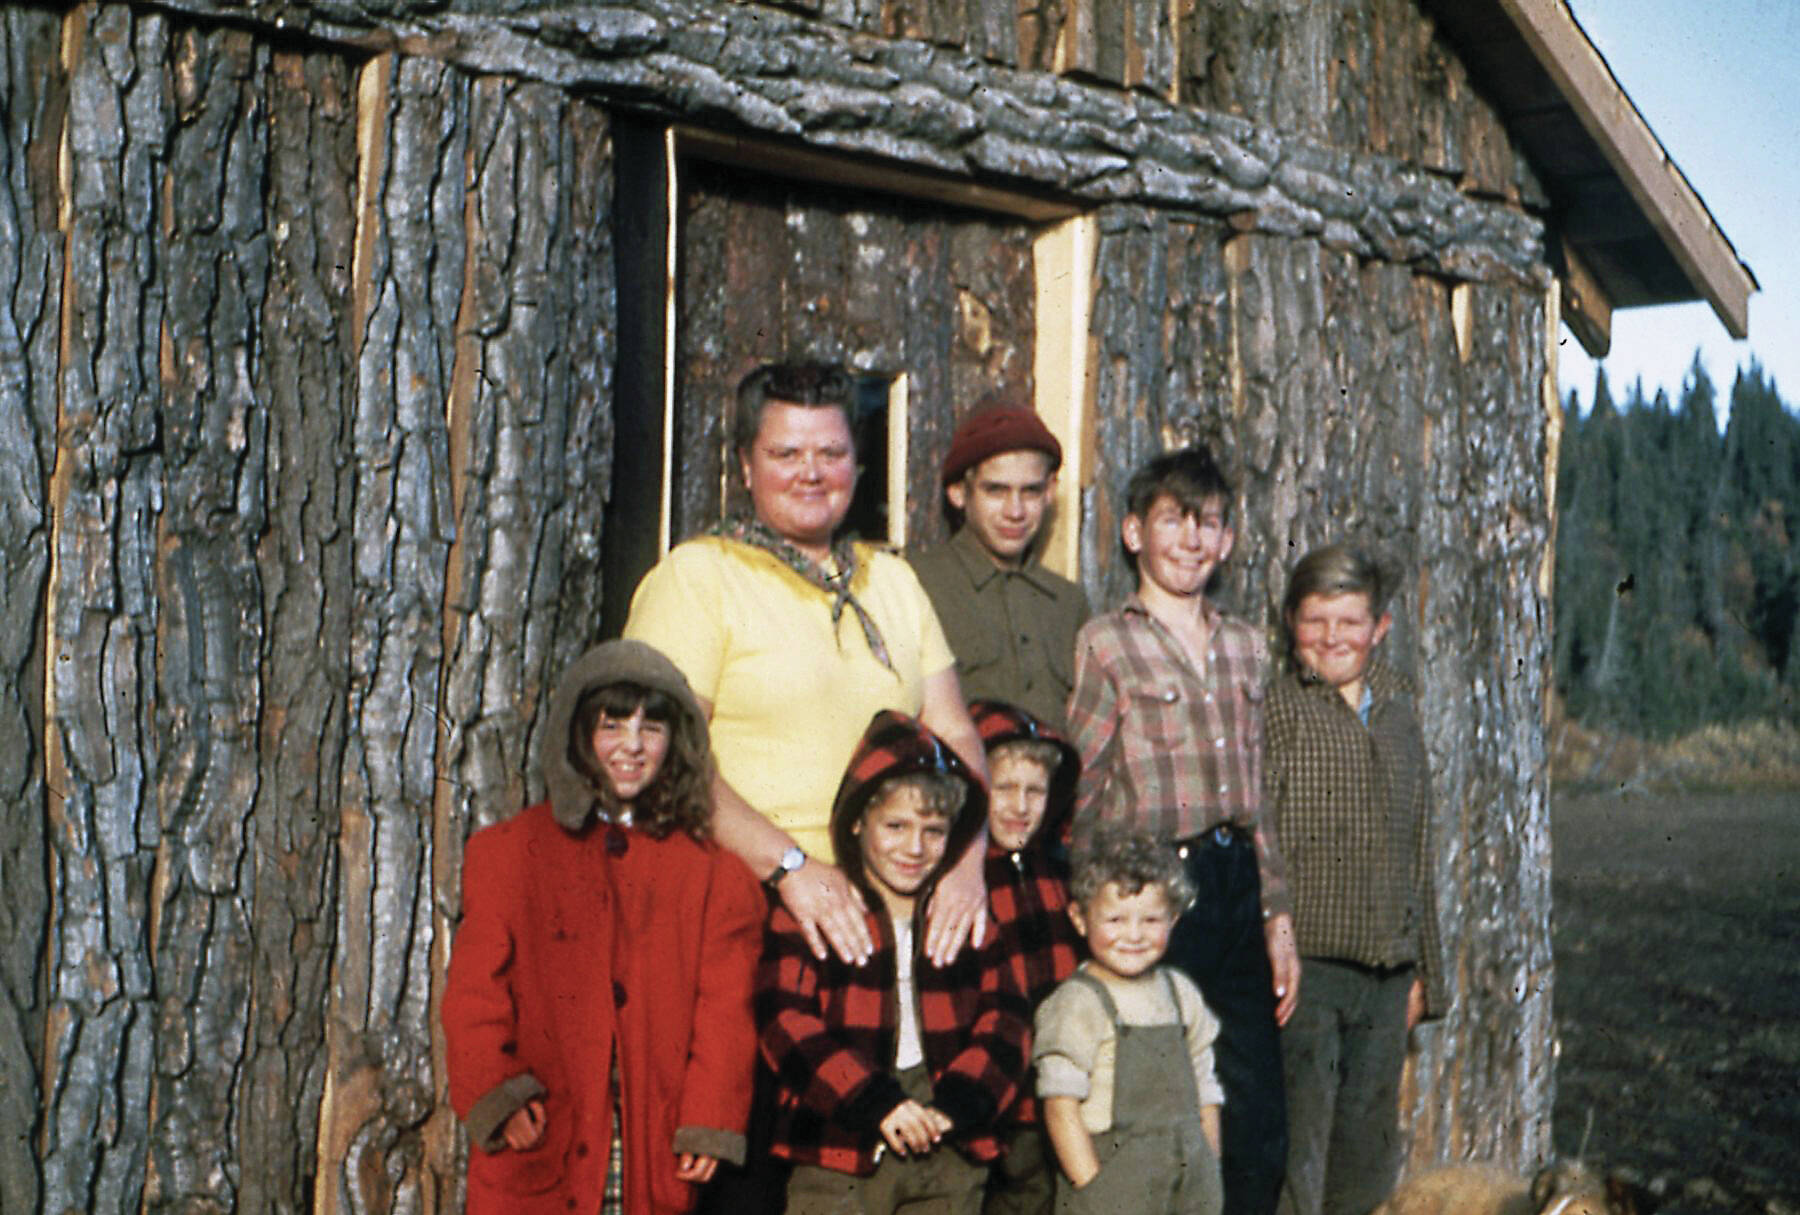 Louvie “Vi” Chapman photo courtesy of the Pratt Museum
This cottonwood-log structure was Anchor Point’s first-ever school, located on the south side of the Anchor River. It was replaced with a better school on the north side, on property donated by Sherman and Louvie Chapman. Seen here are the first teacher, Helen Smith, and some of her students, including Larry Keeler standing next to Smith.